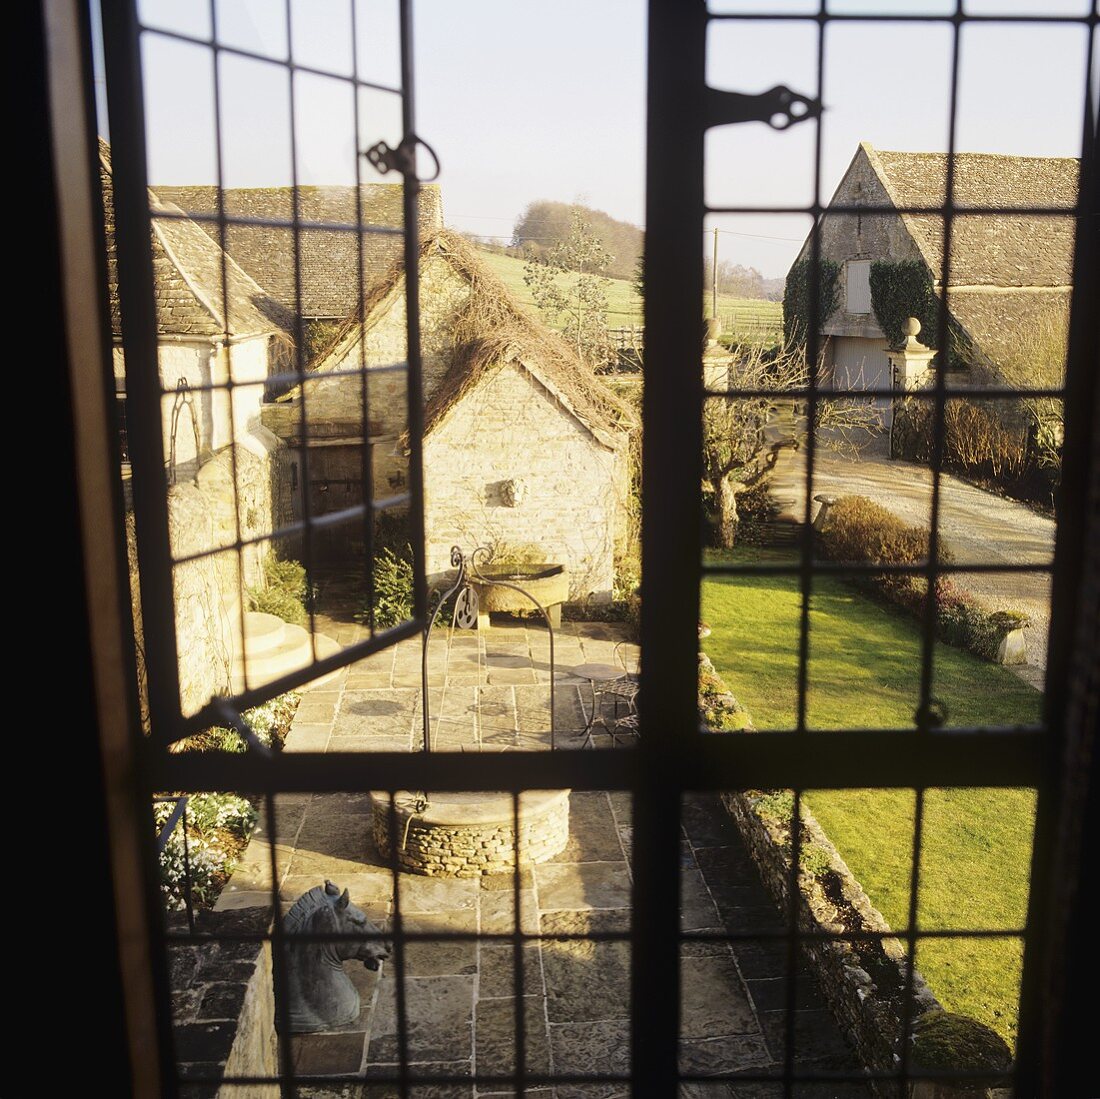 A view through a window onto a courtyard with flagstones and a lawn in front of an English country house